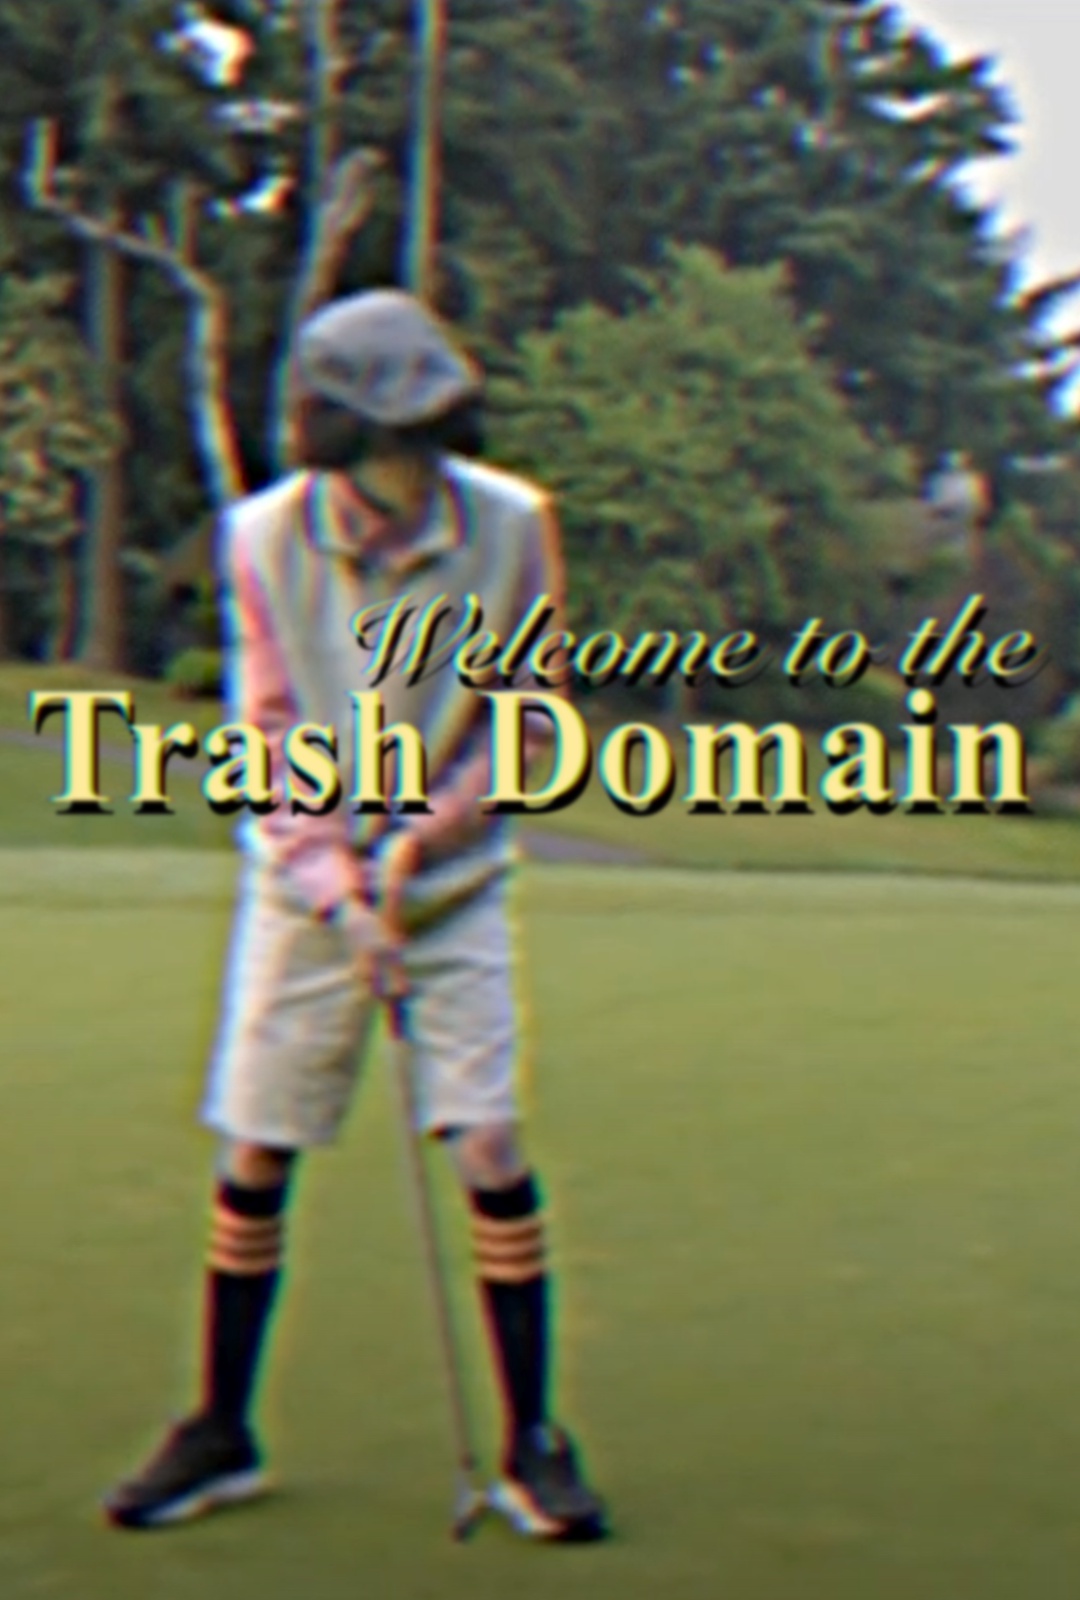 Welcome to the Trash Domain